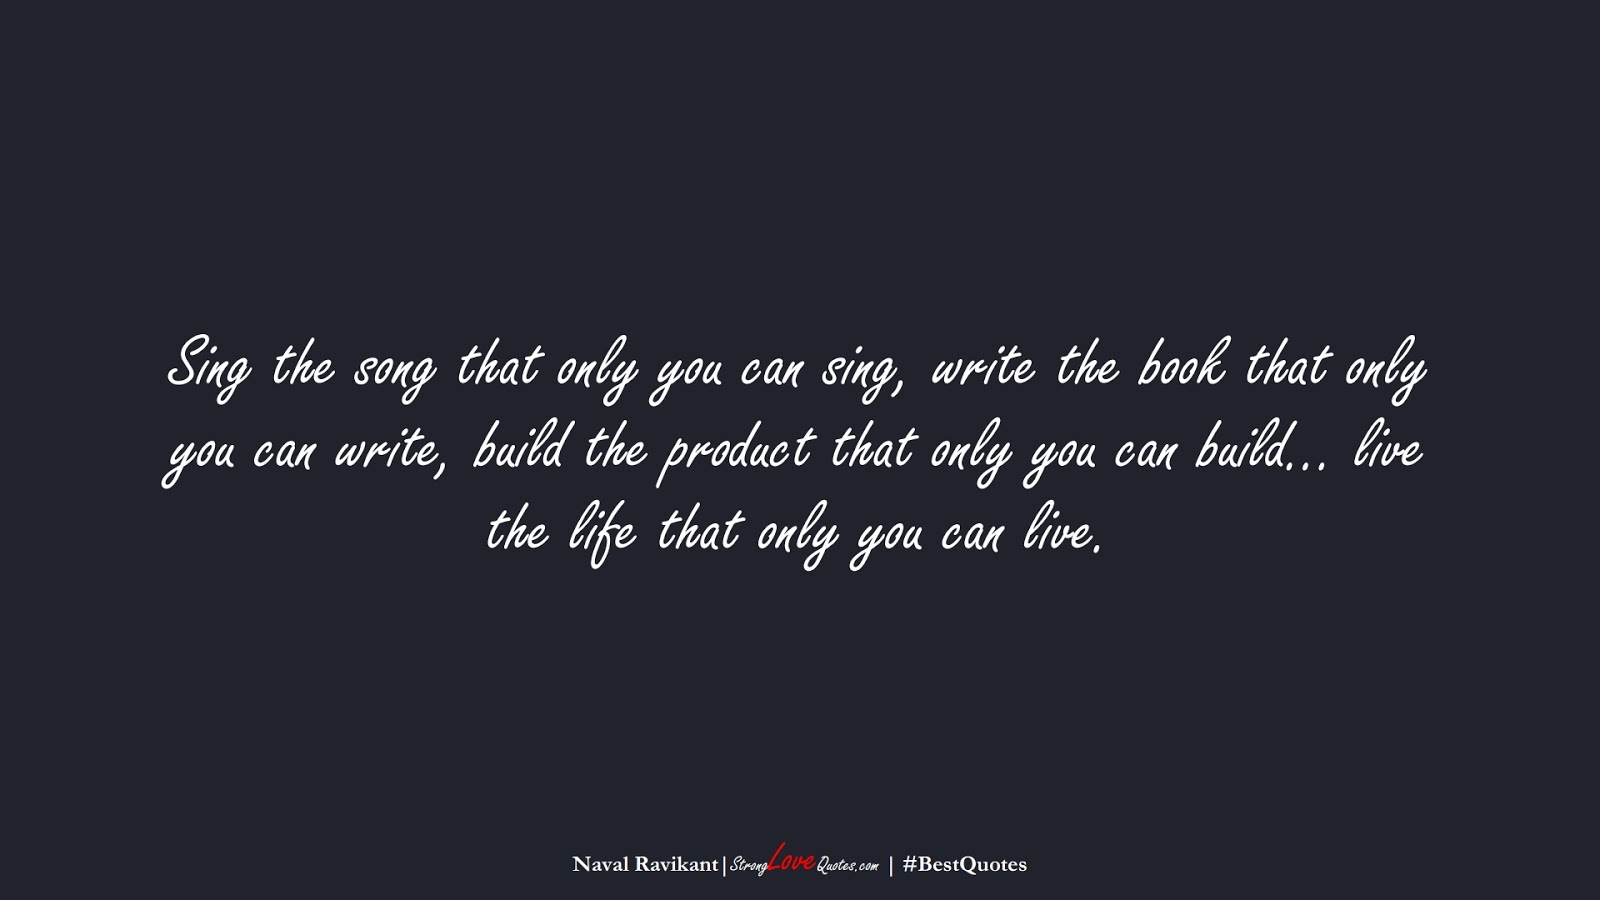 Sing the song that only you can sing, write the book that only you can write, build the product that only you can build… live the life that only you can live. (Naval Ravikant);  #BestQuotes